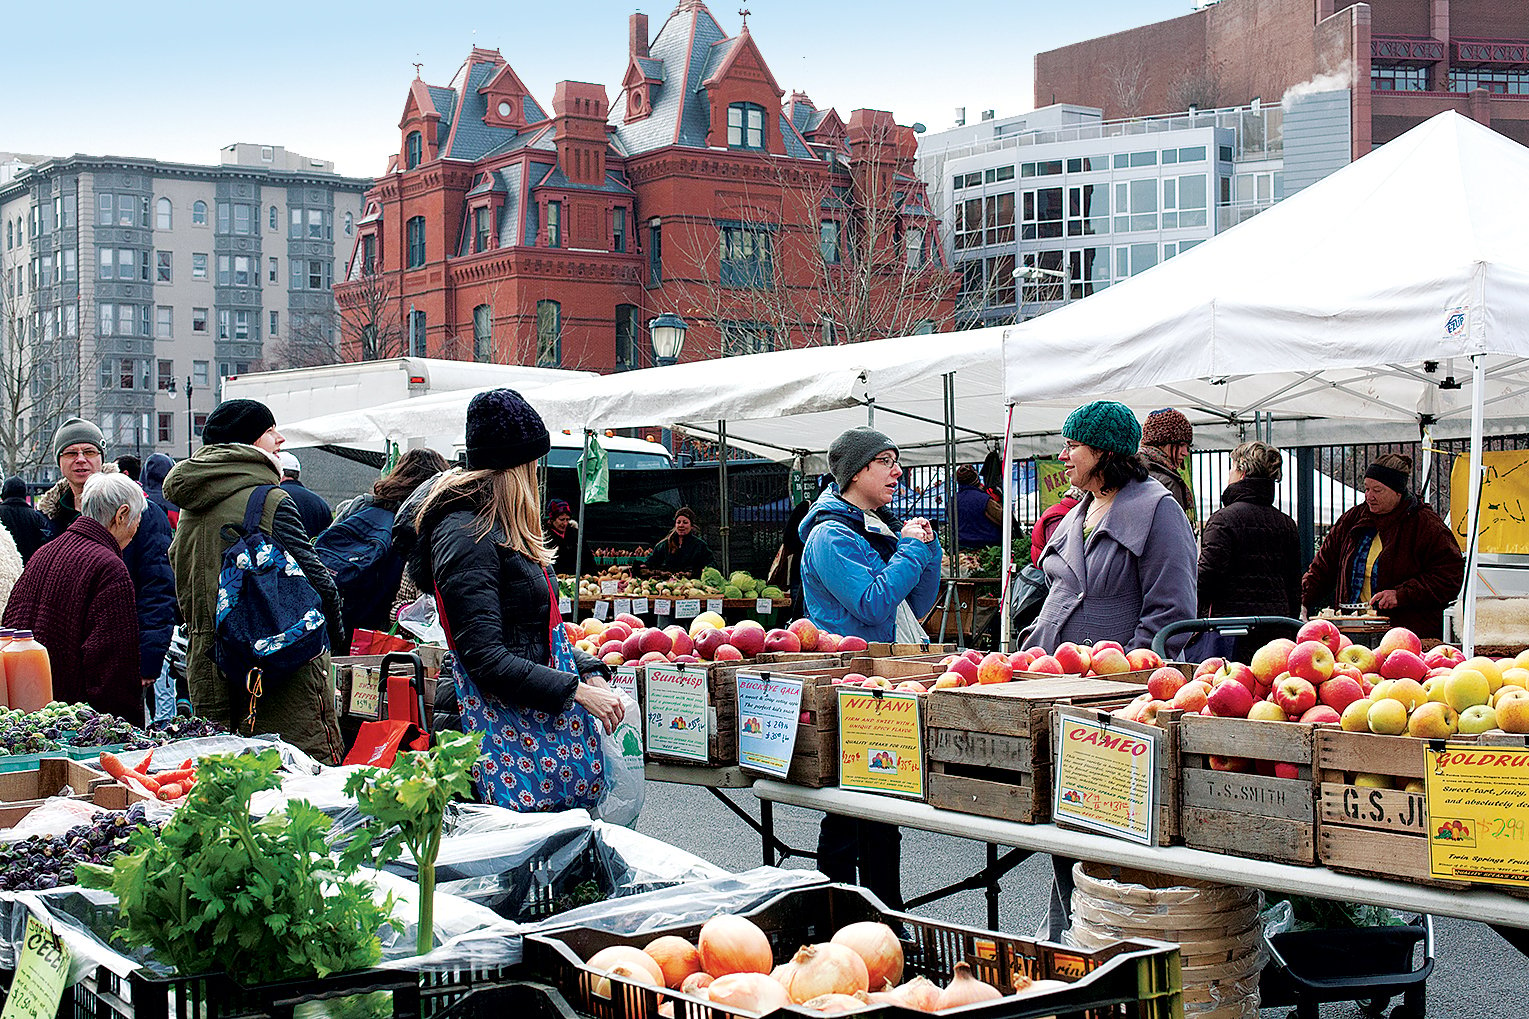 Dupont's Sunday farmers market is a favorite among local chefs. Photograph by Hong Le.